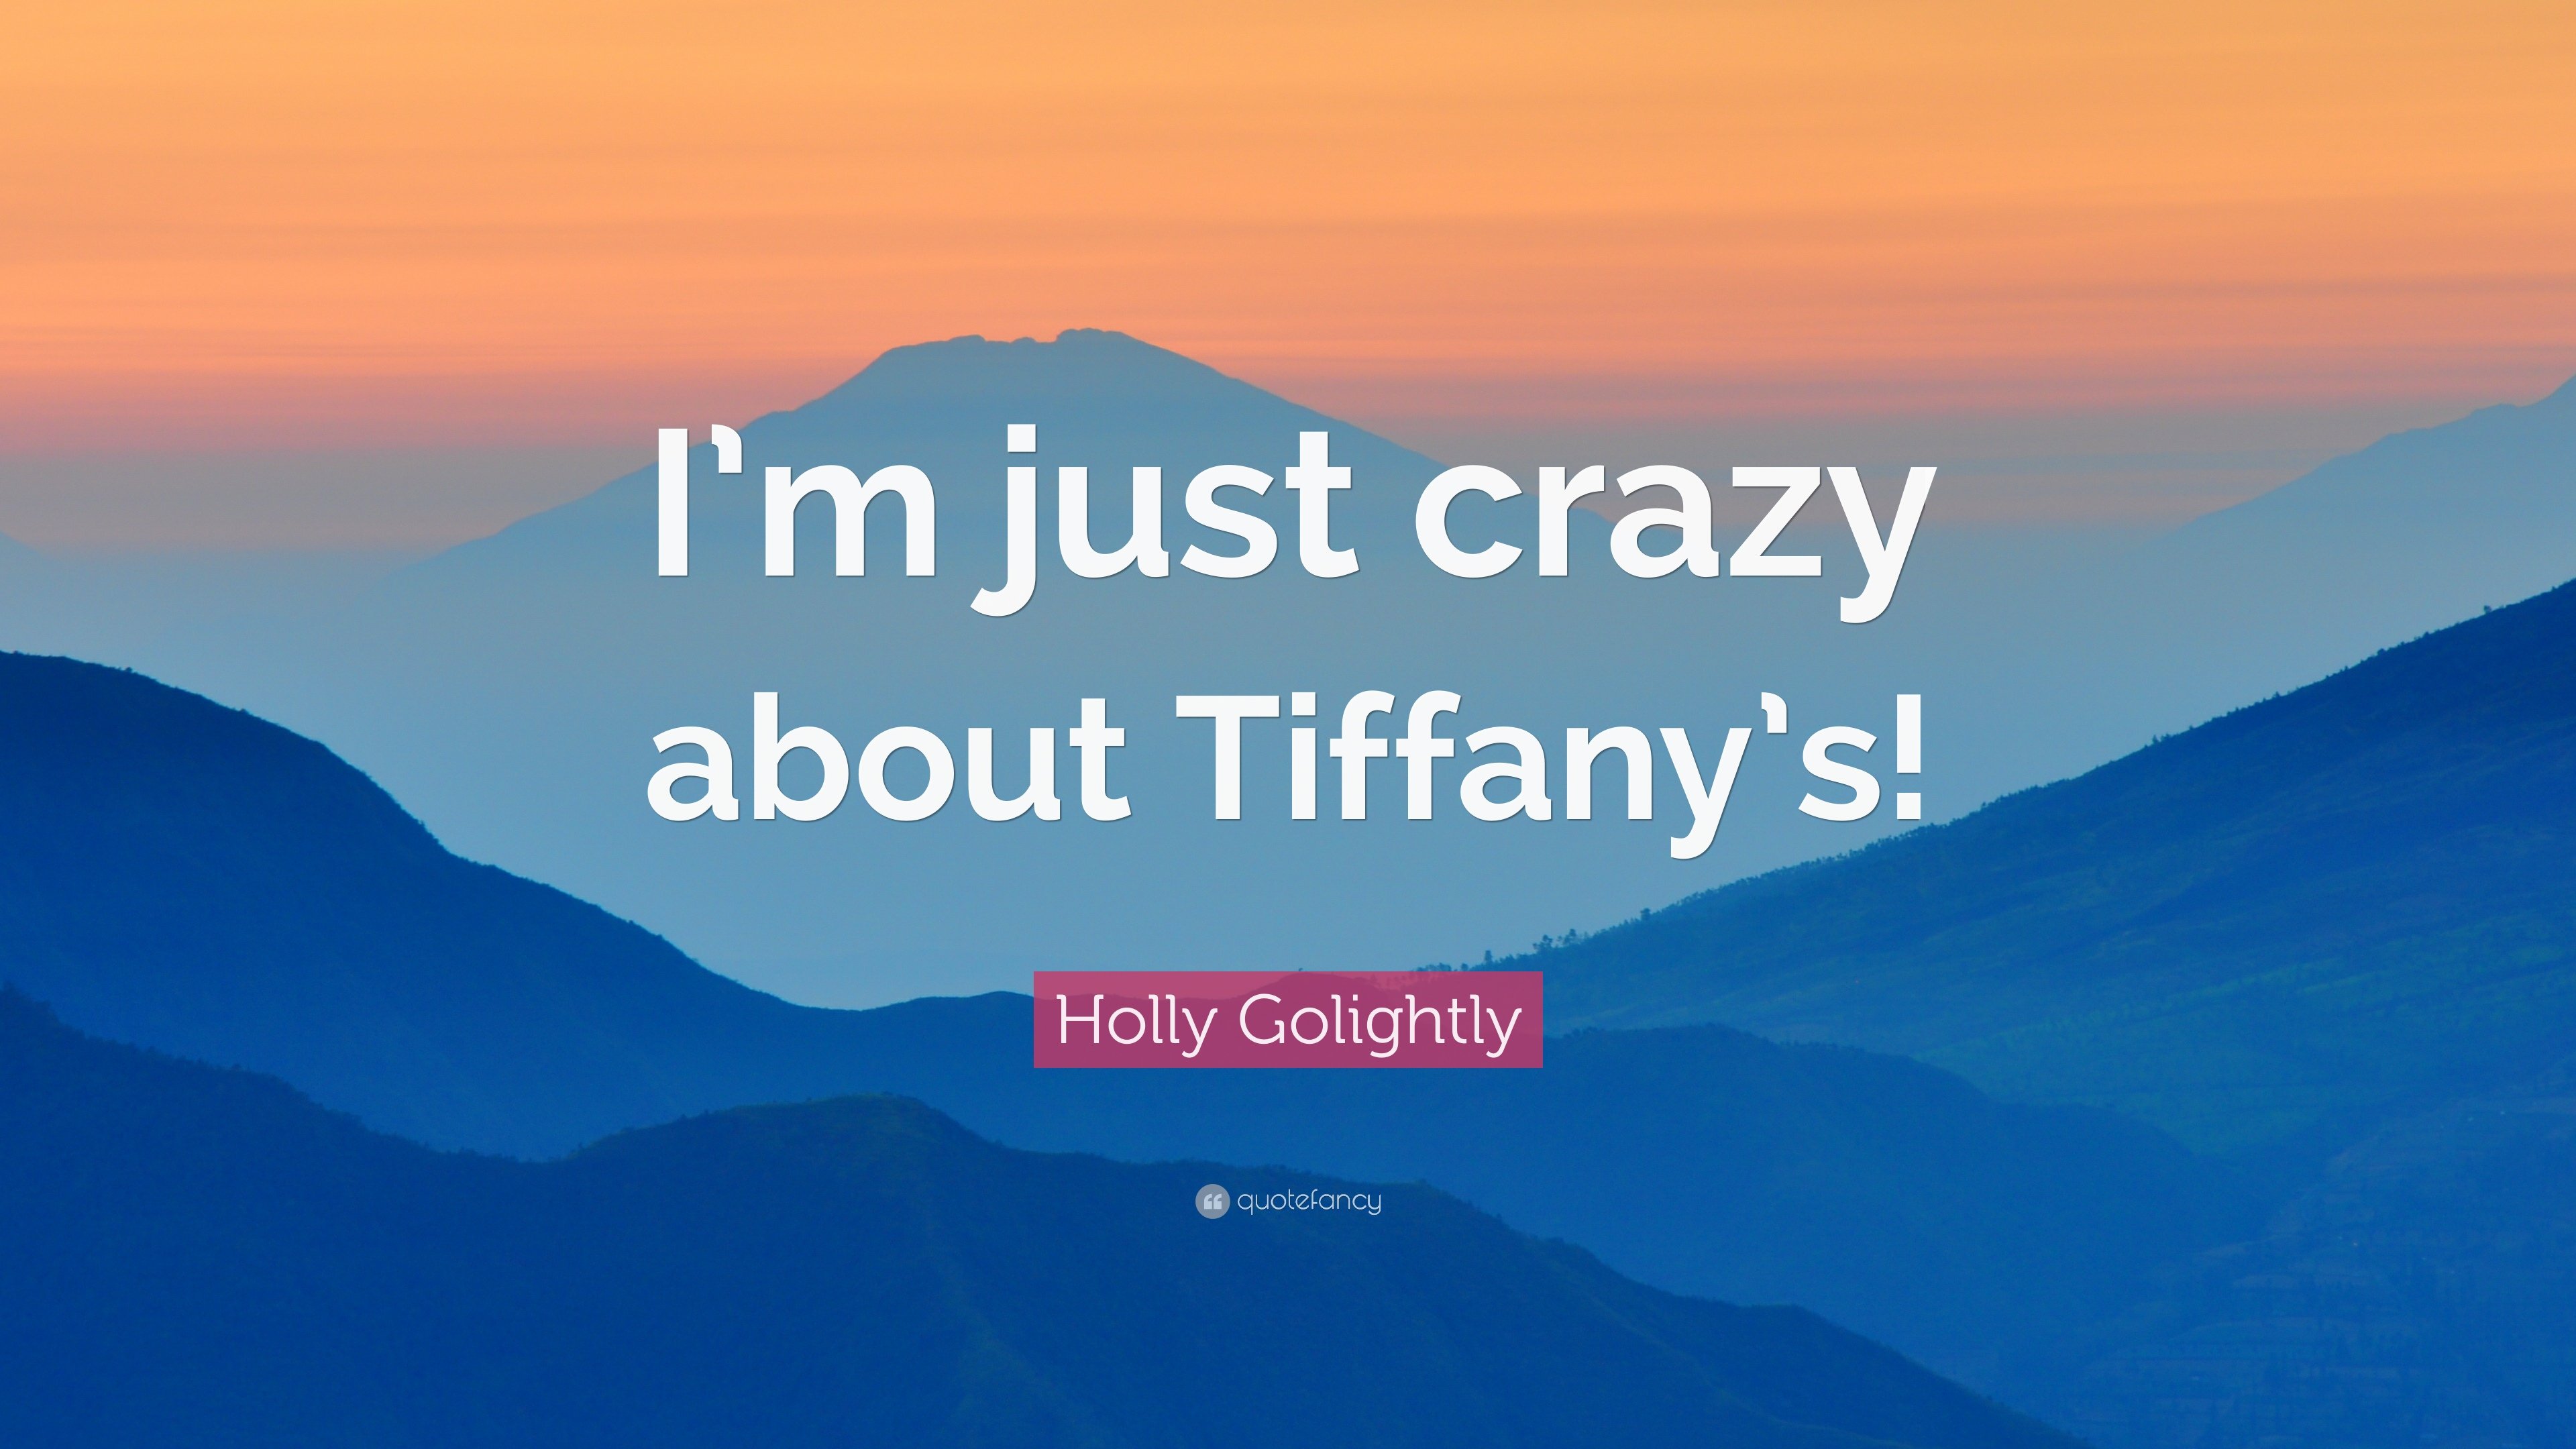 Holly Golightly Quote: “I'm just crazy about Tiffany's!” 7